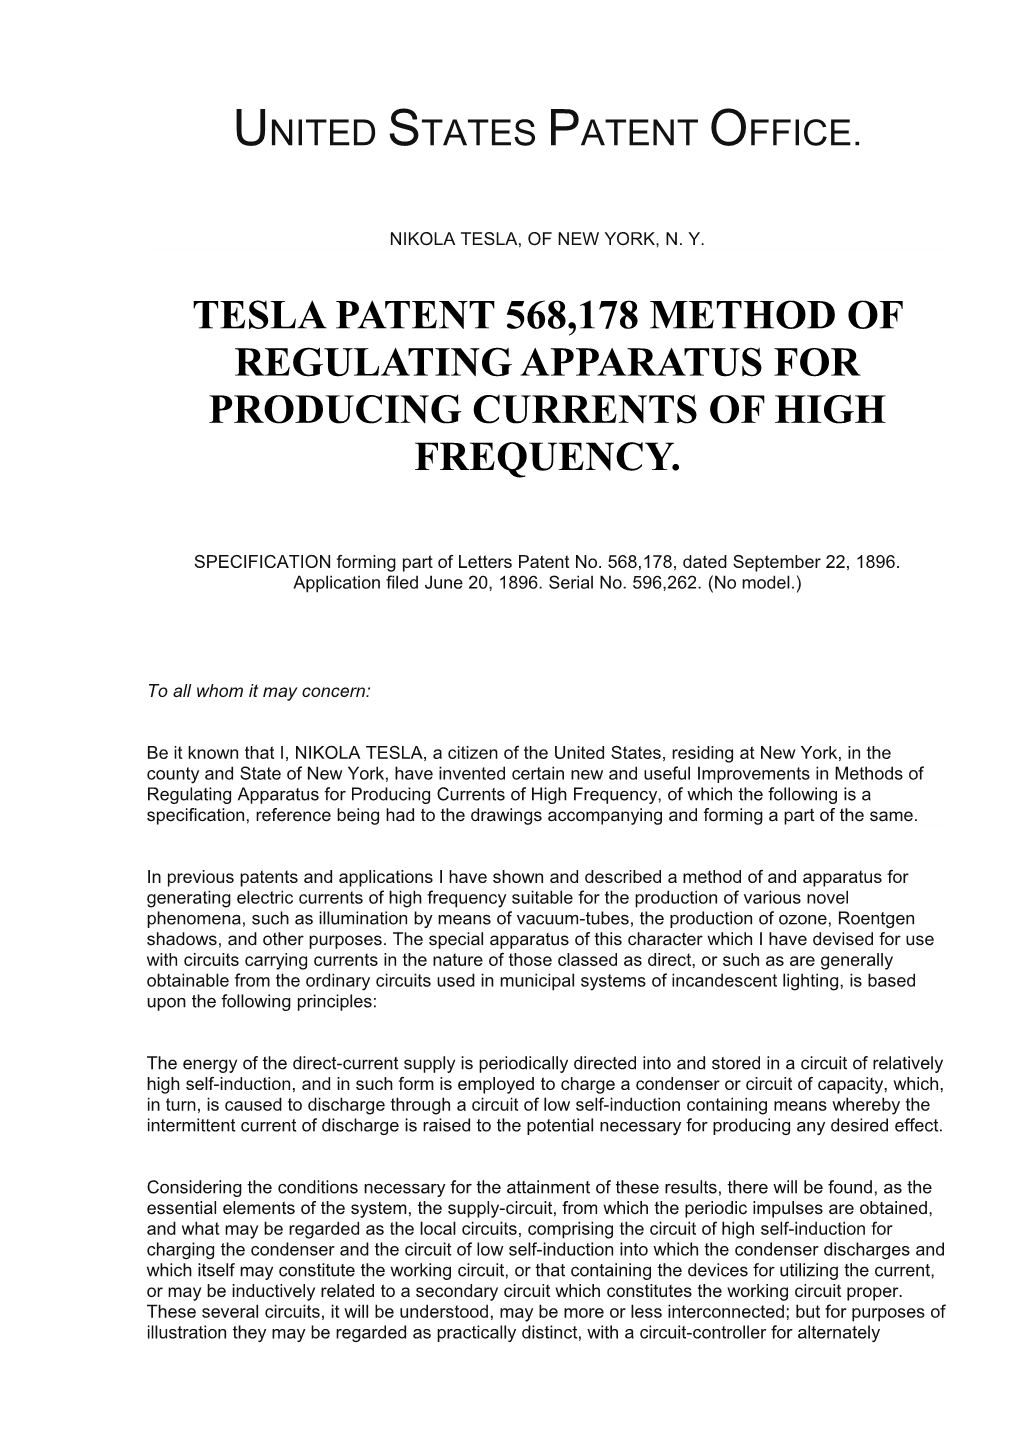 Tesla Patent 568,178 Method of Regulating Apparatus for Producing Currents of High Frequency